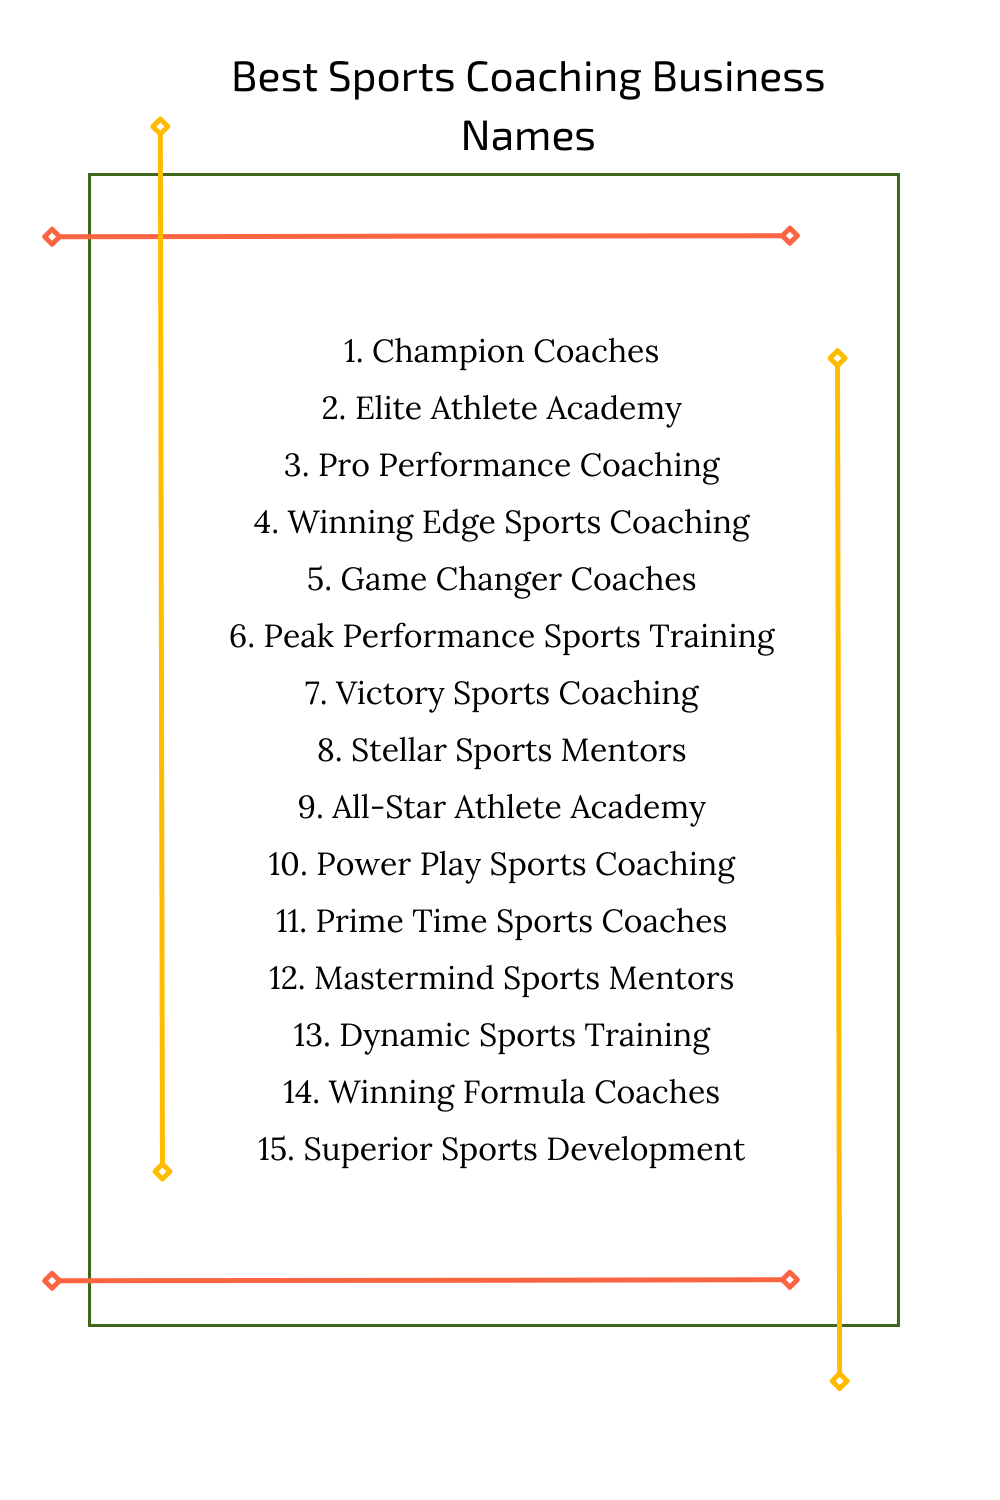 Best Sports Coaching Business Names